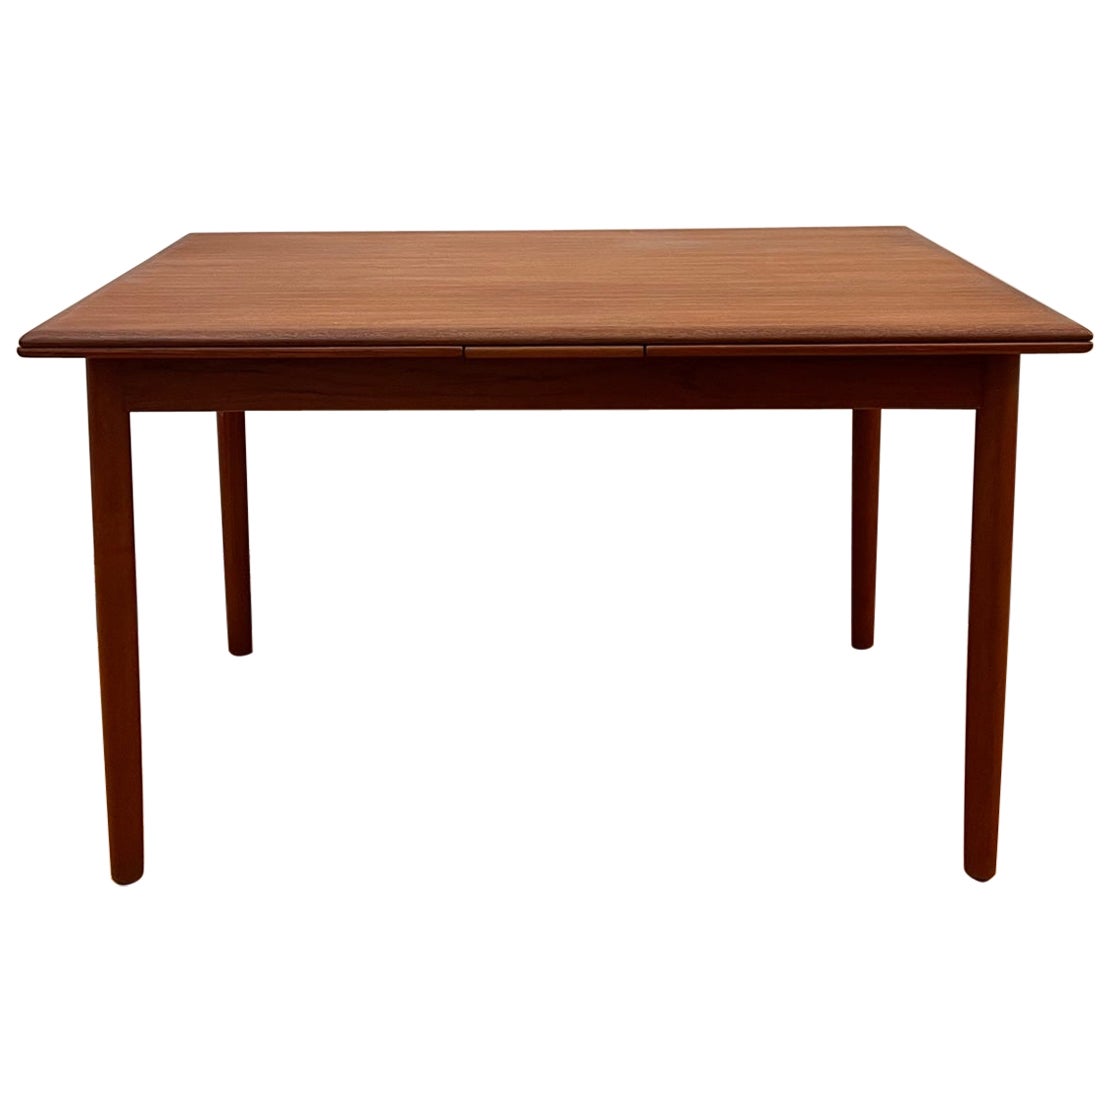 Scandinavian Teak and Rosewood Dining Table Niels Otto with Extensions Danish